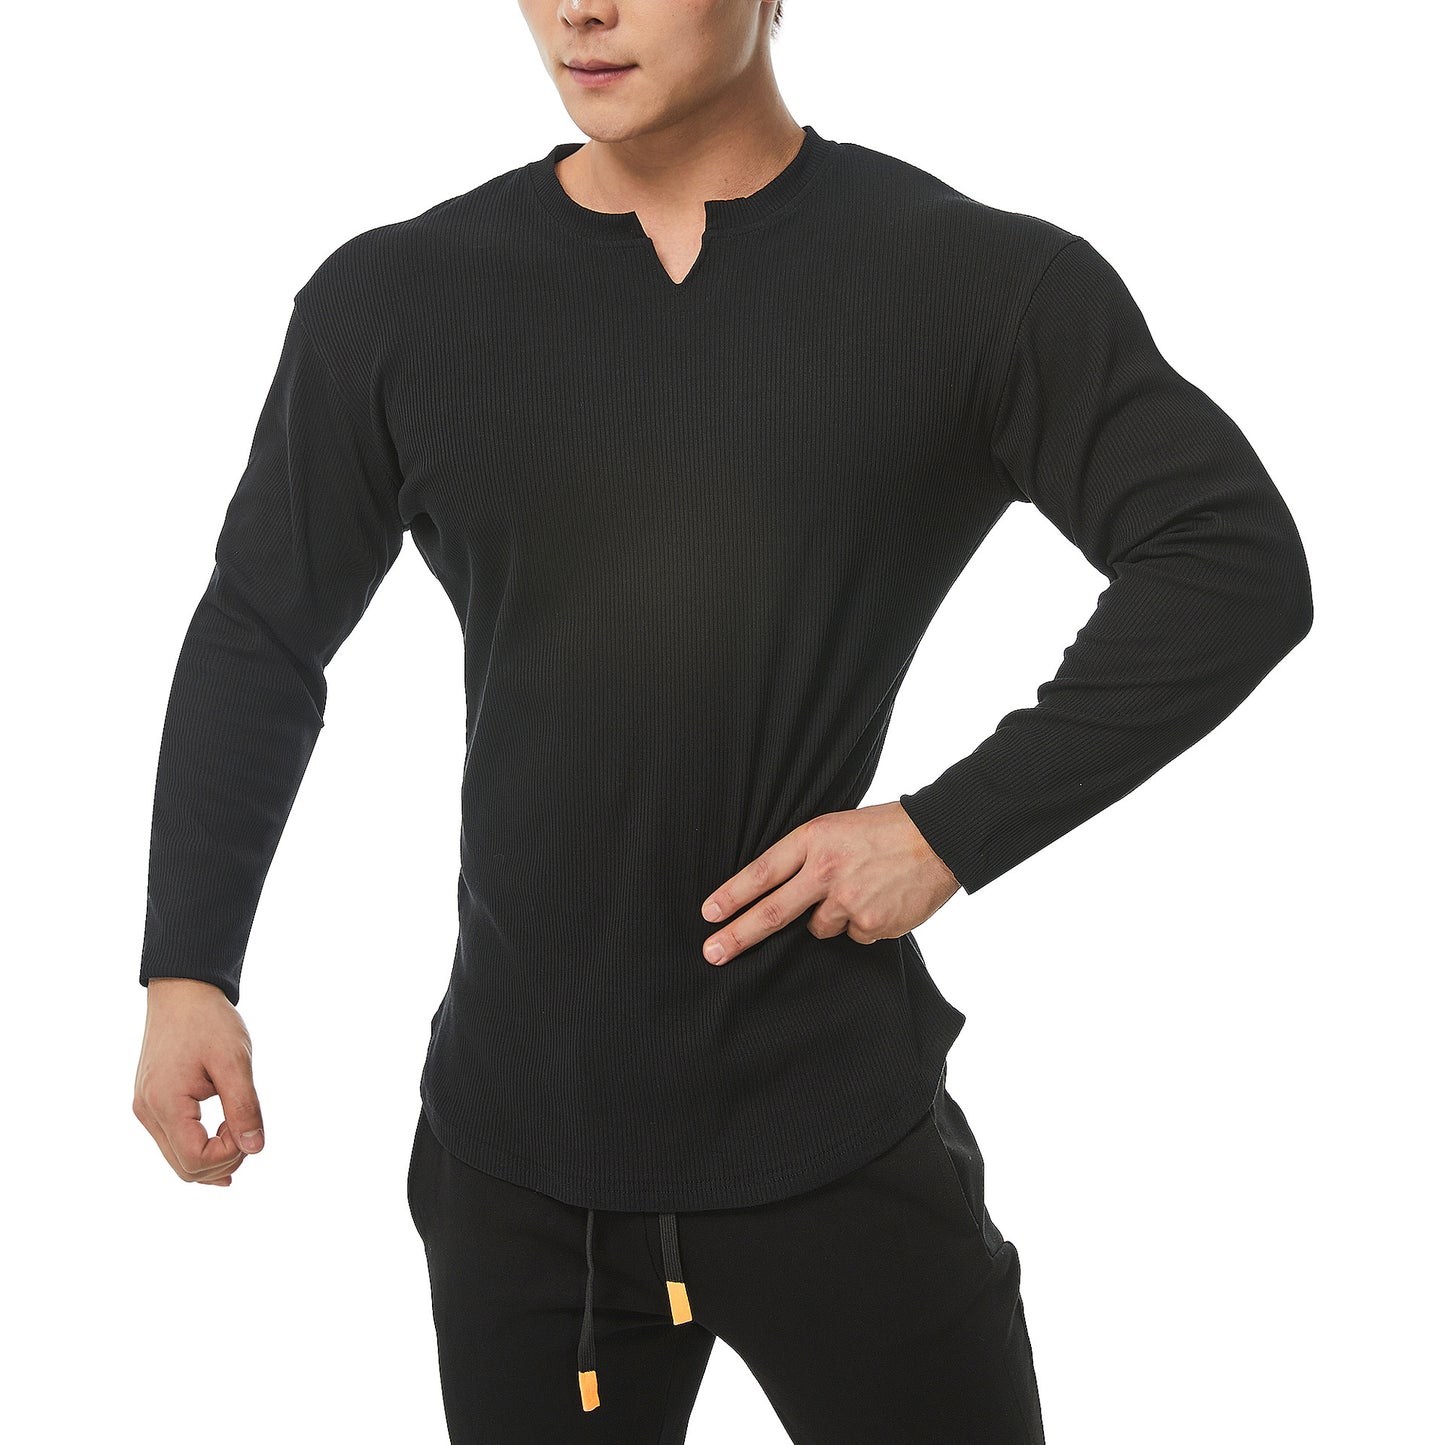 Autumn new men's long sleeve T-shirt arc hem thread fabric comfortable breathable casual clothing outdoor sports